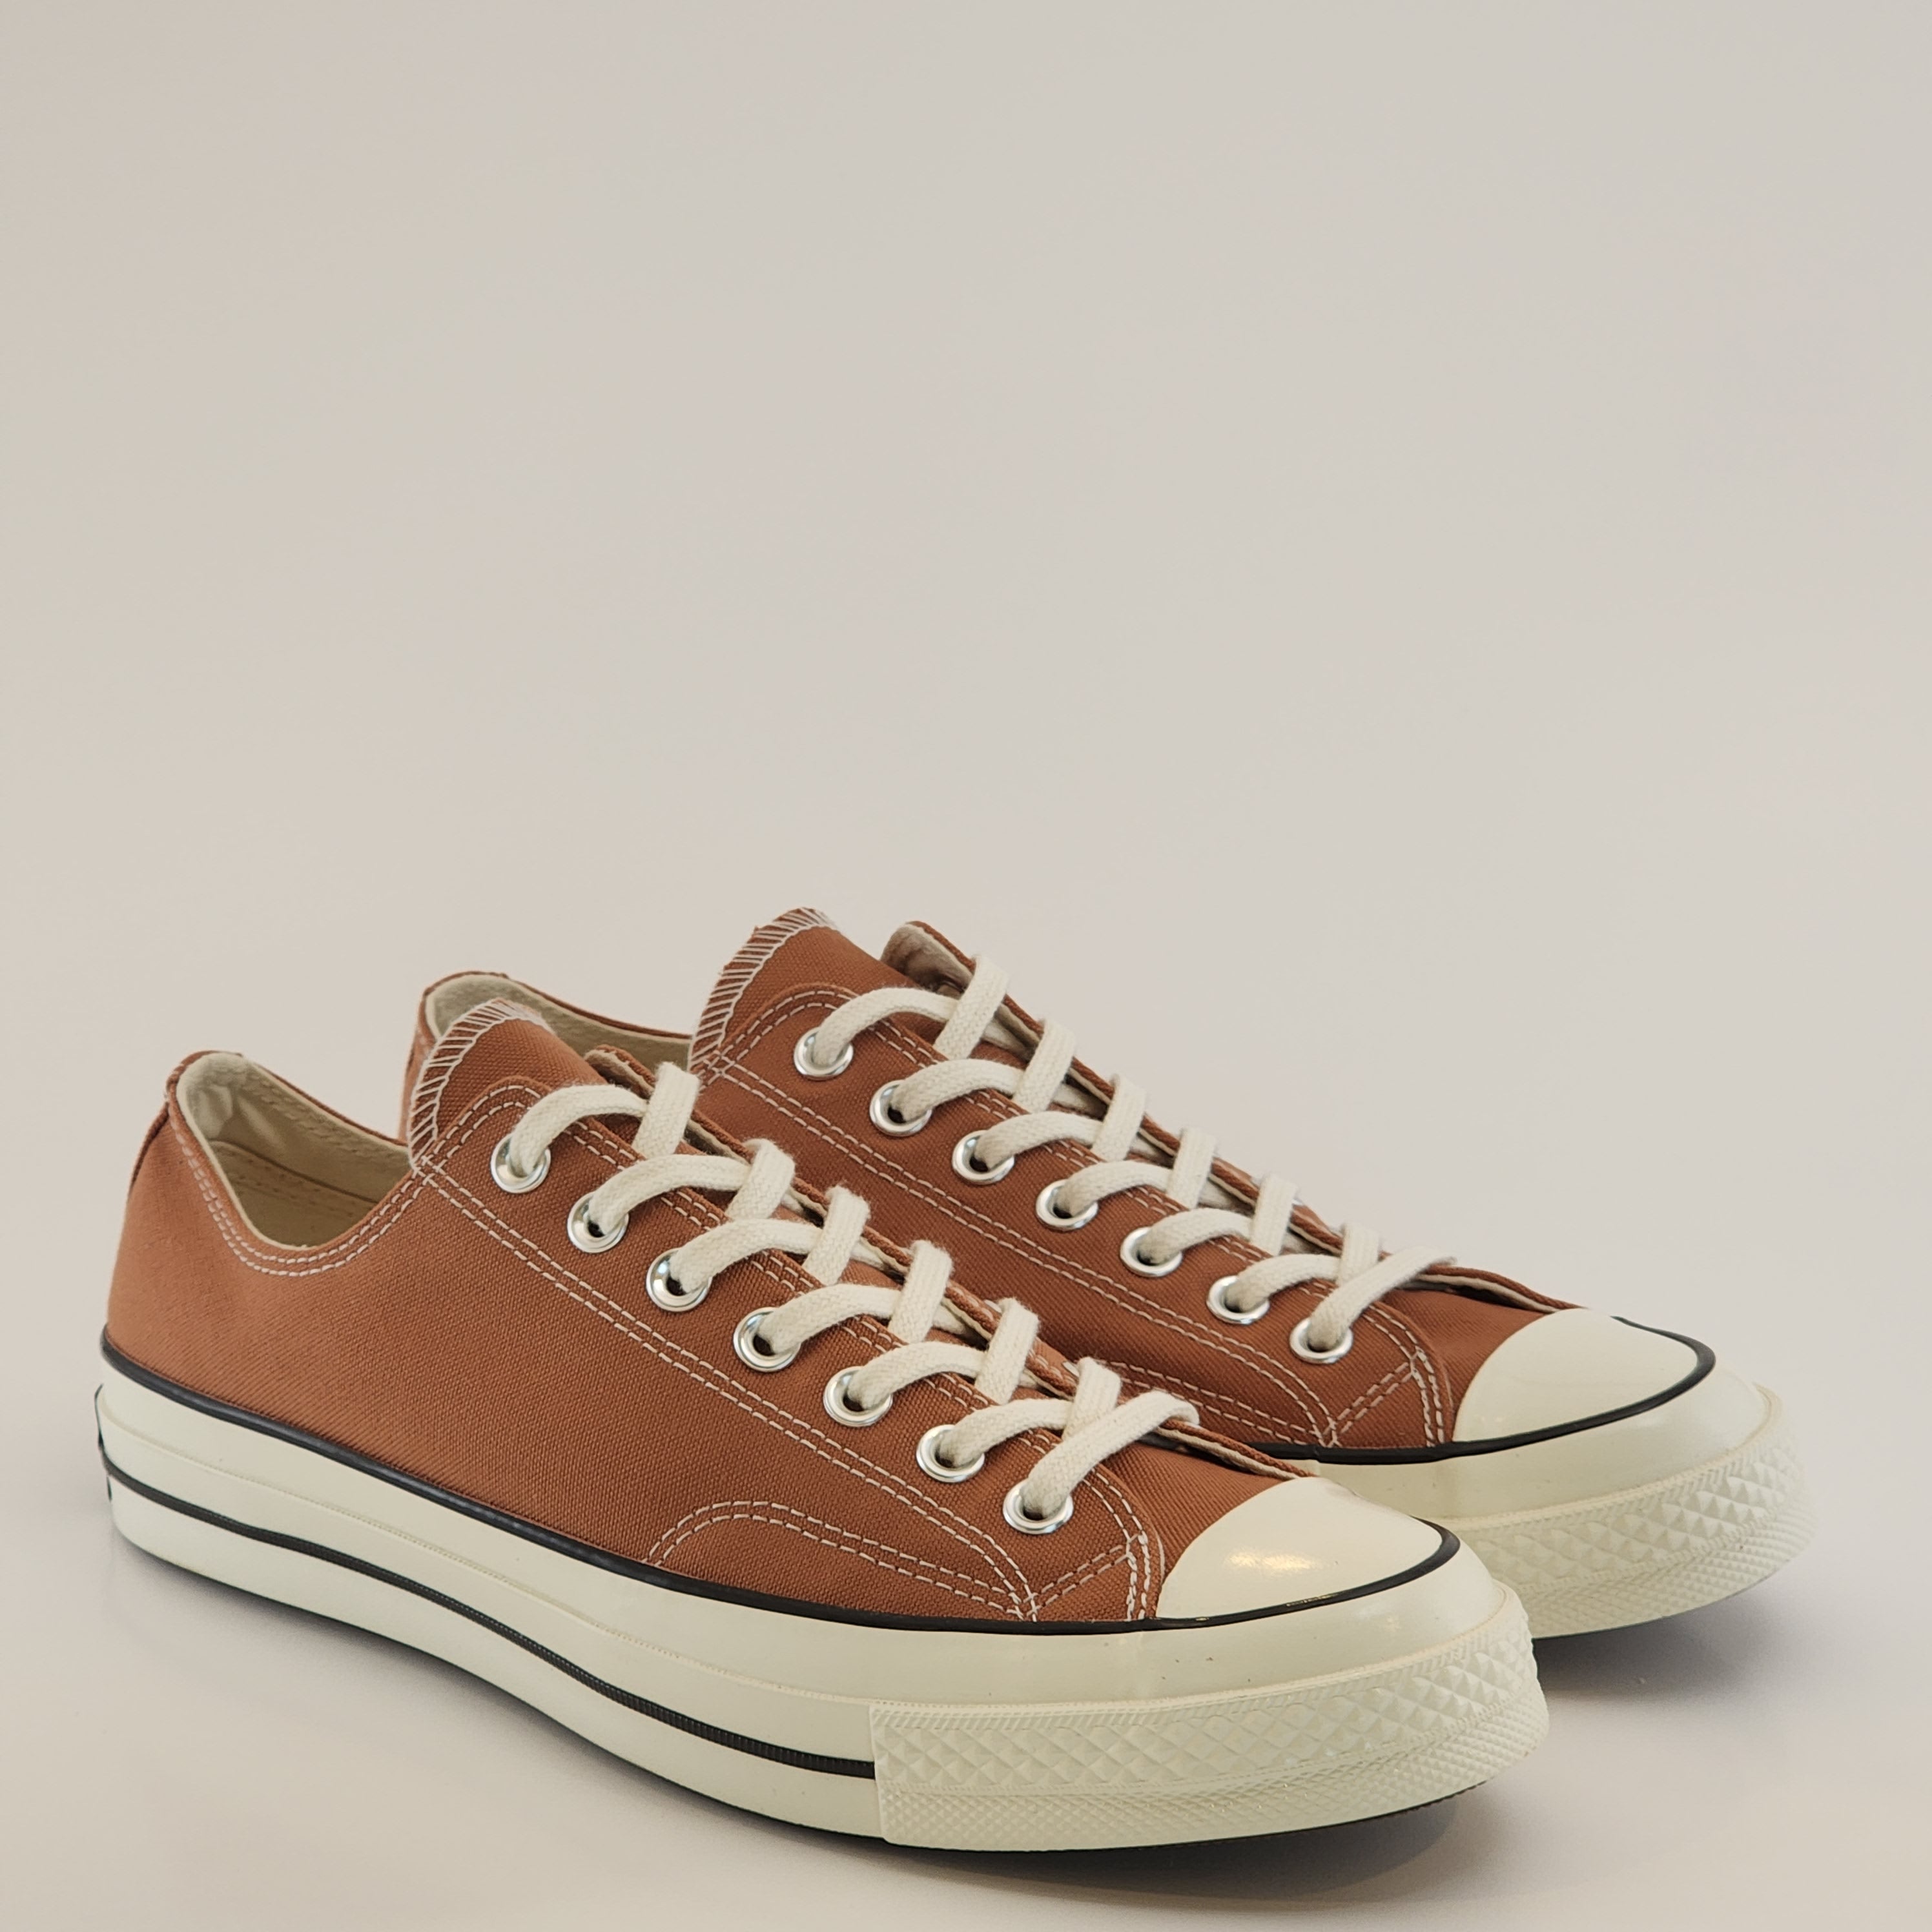 Converse Chuck 70 Low Ox Seasonal Color 'Mineral Clay' Sneakers A00461C NWT